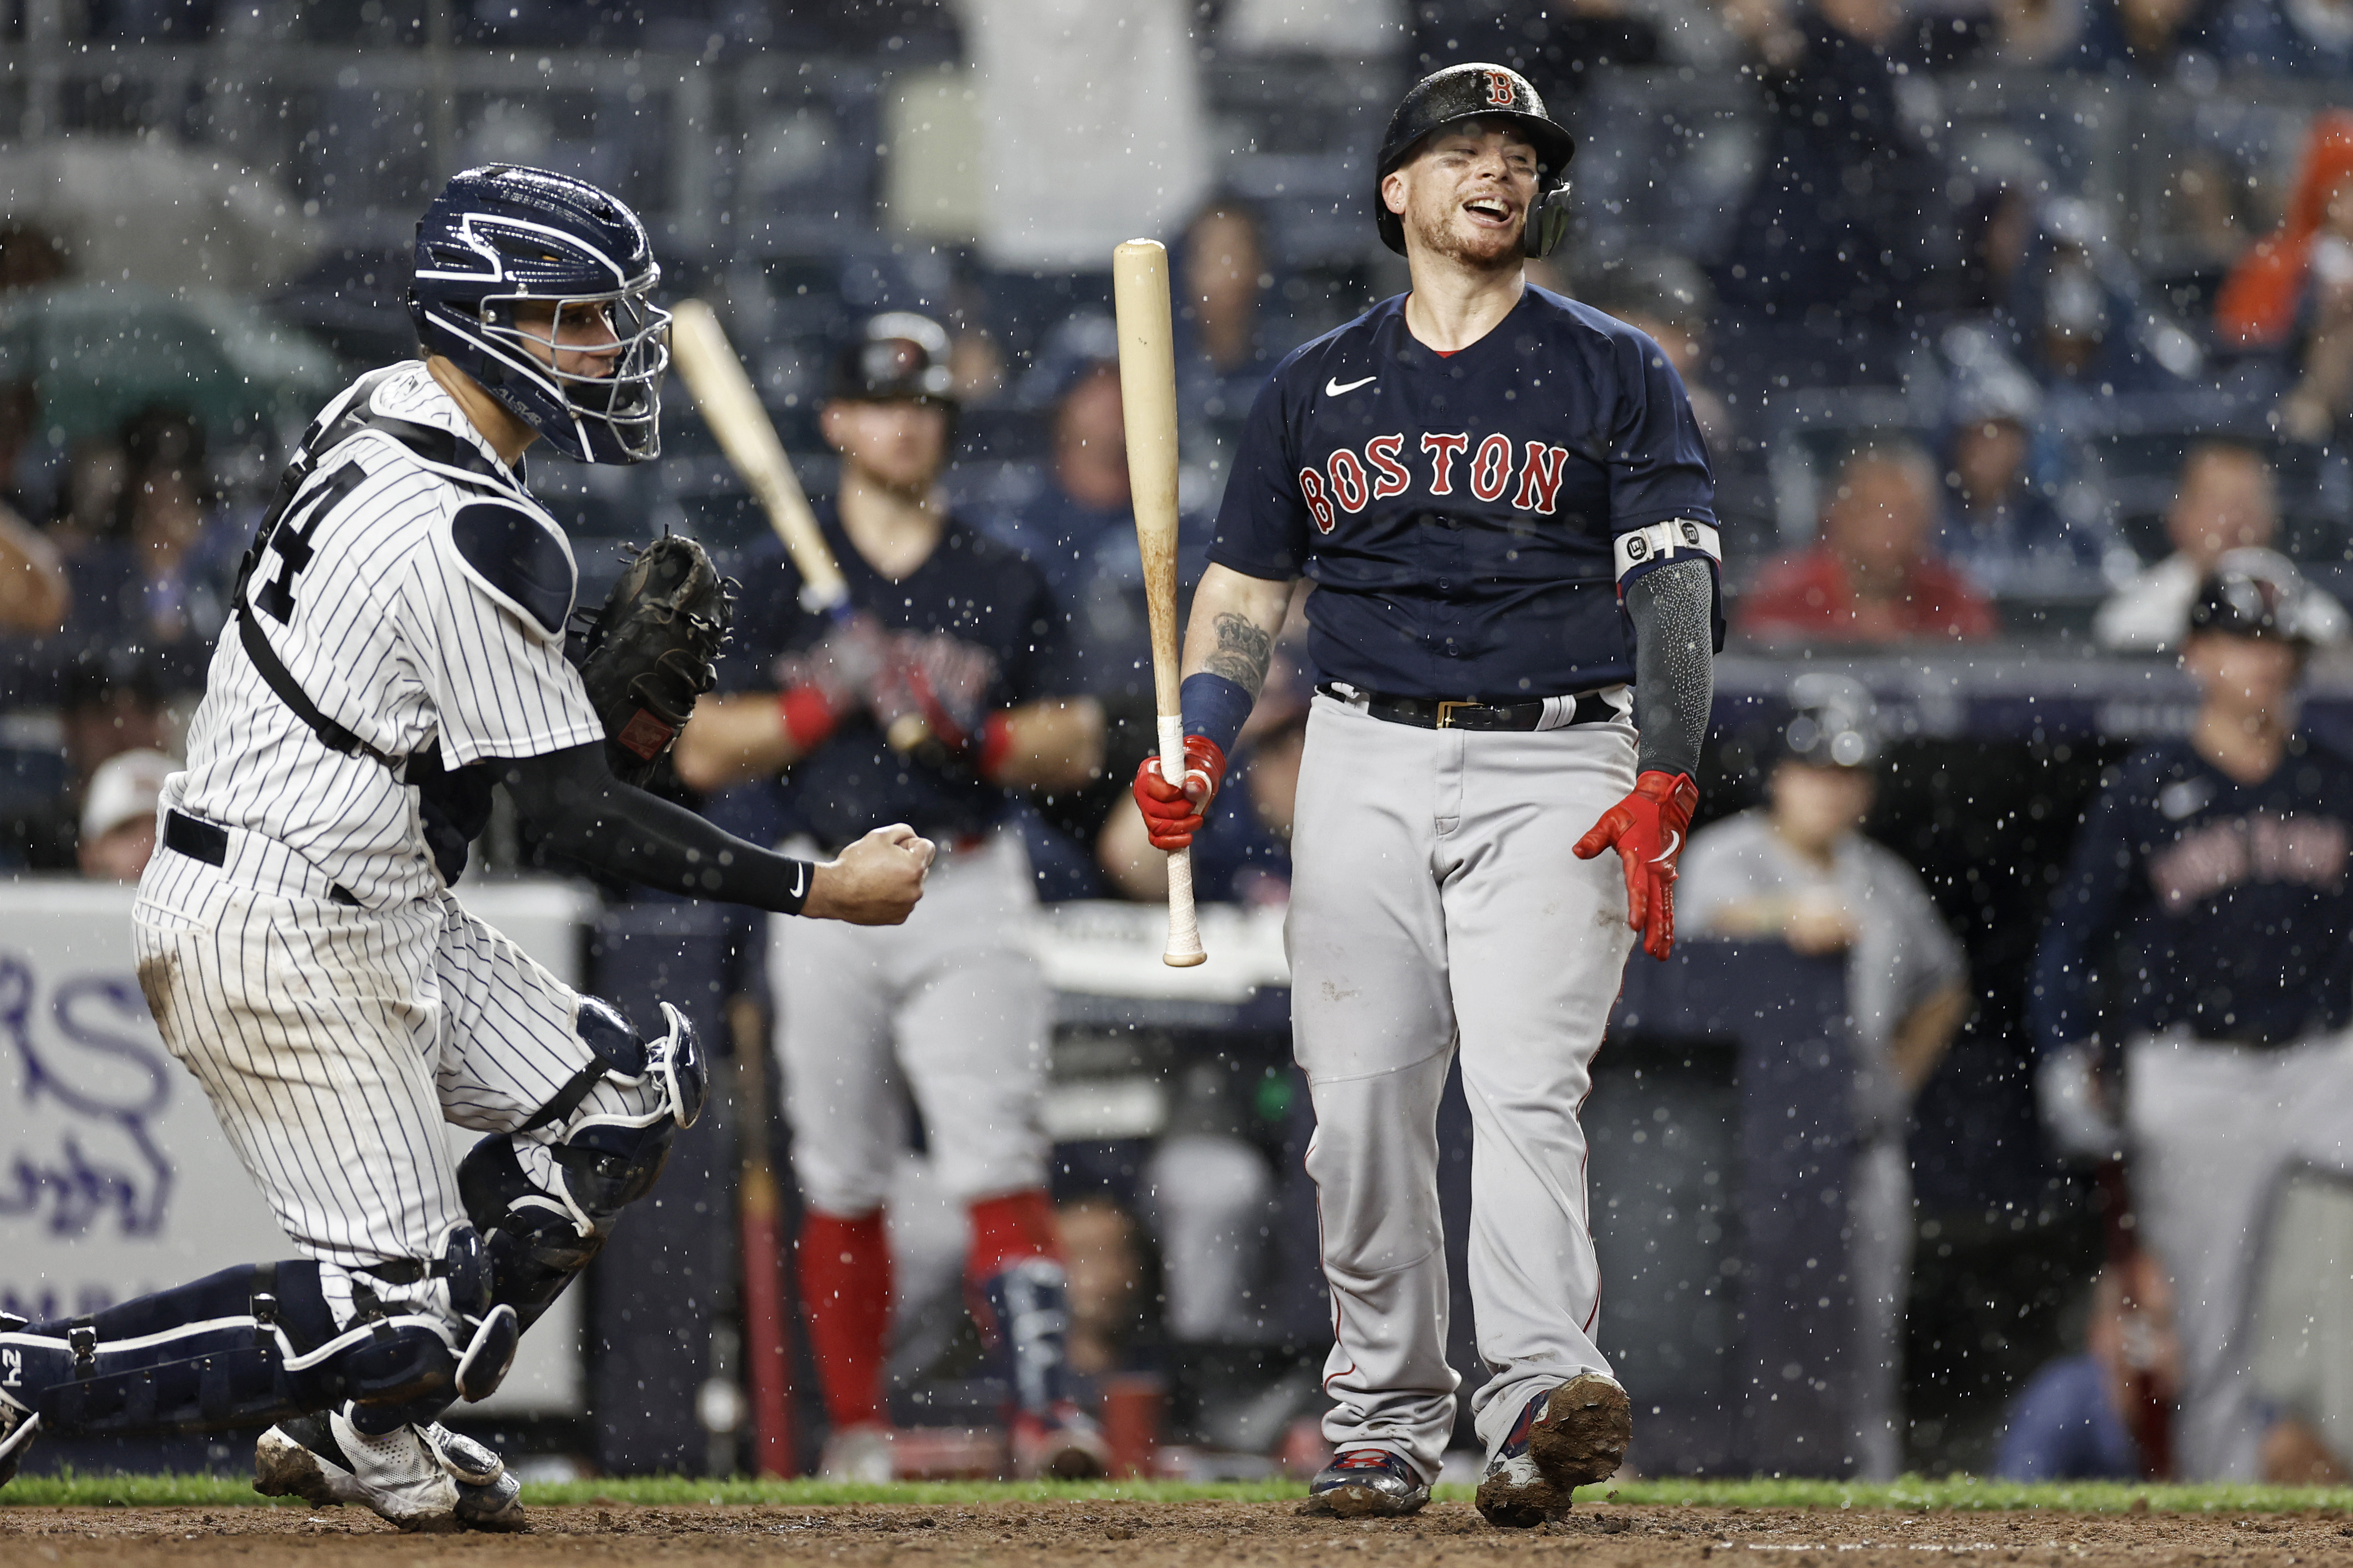 The Red Sox score 4 in the top of the 9th to secure a much-needed win to  tie them with the Yankees! 